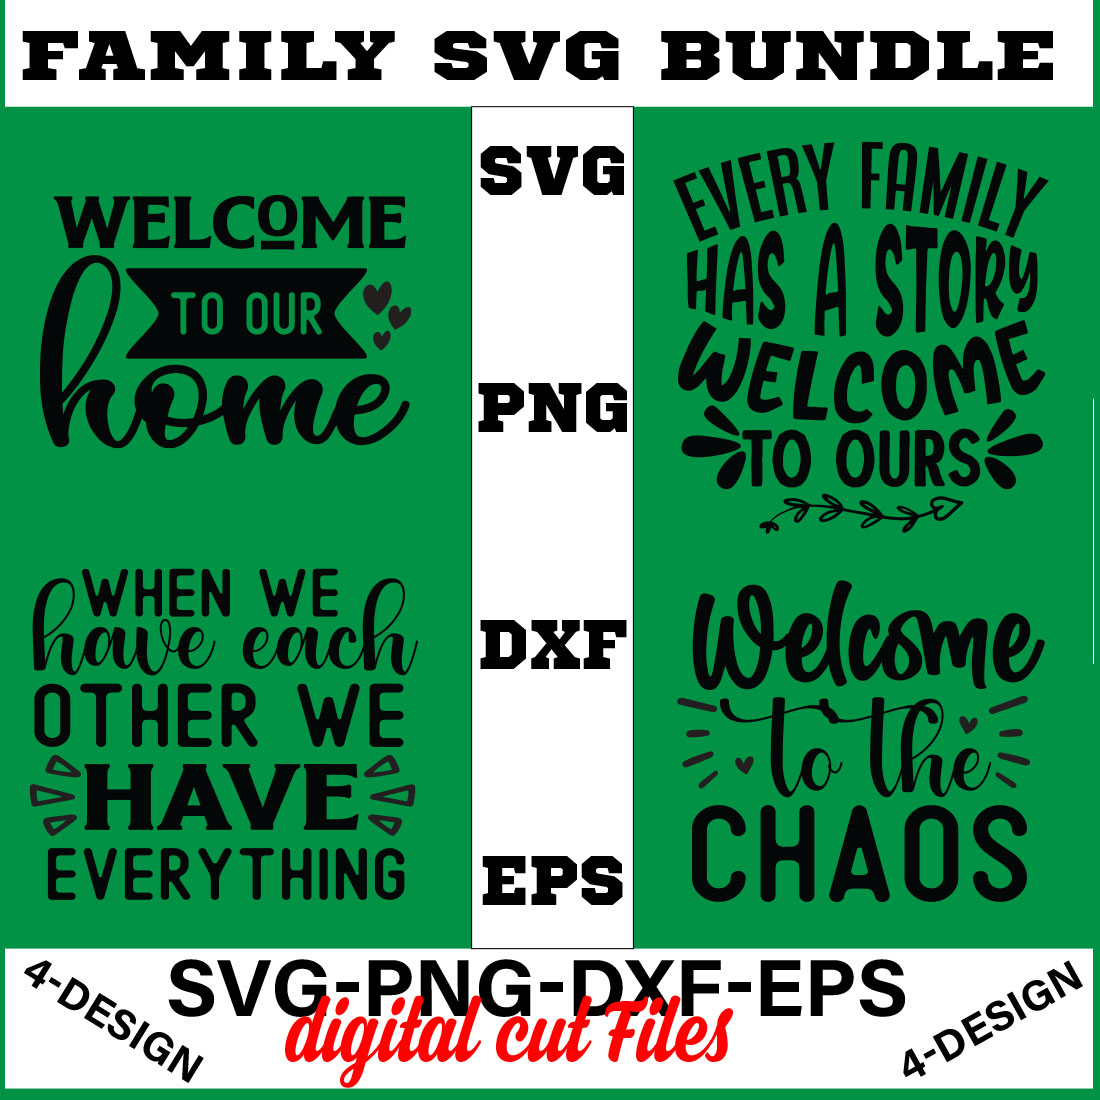 Family Quotes svg, Family svg Bundle, Family Sayings svg, Family Bundle svg Volume-11 cover image.